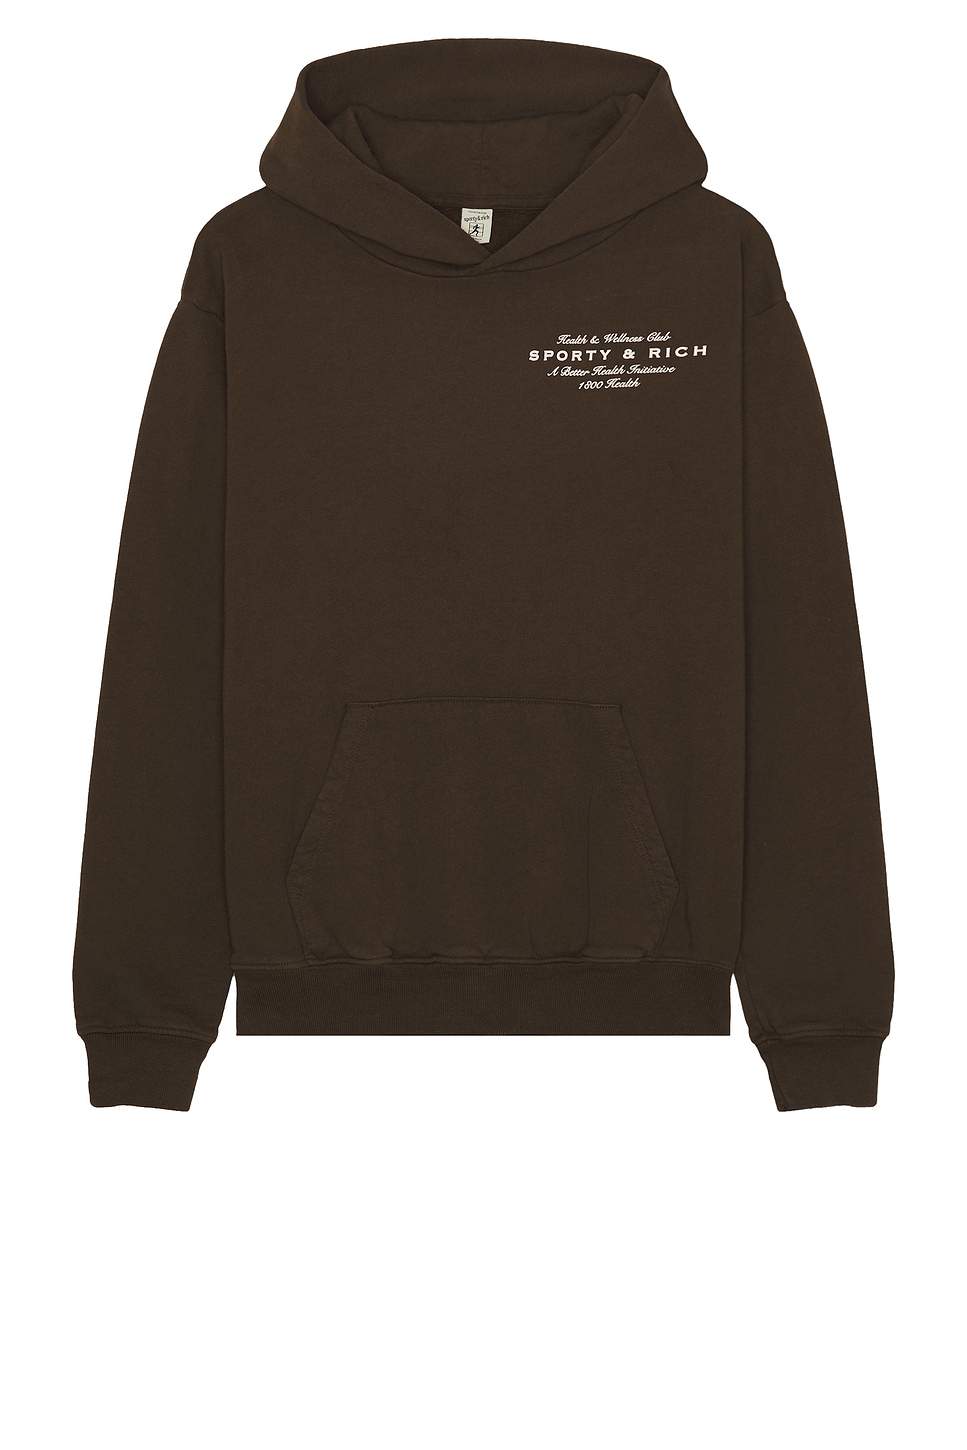 Image 1 of Sporty & Rich Health Initiative Hoodie in Chocolate